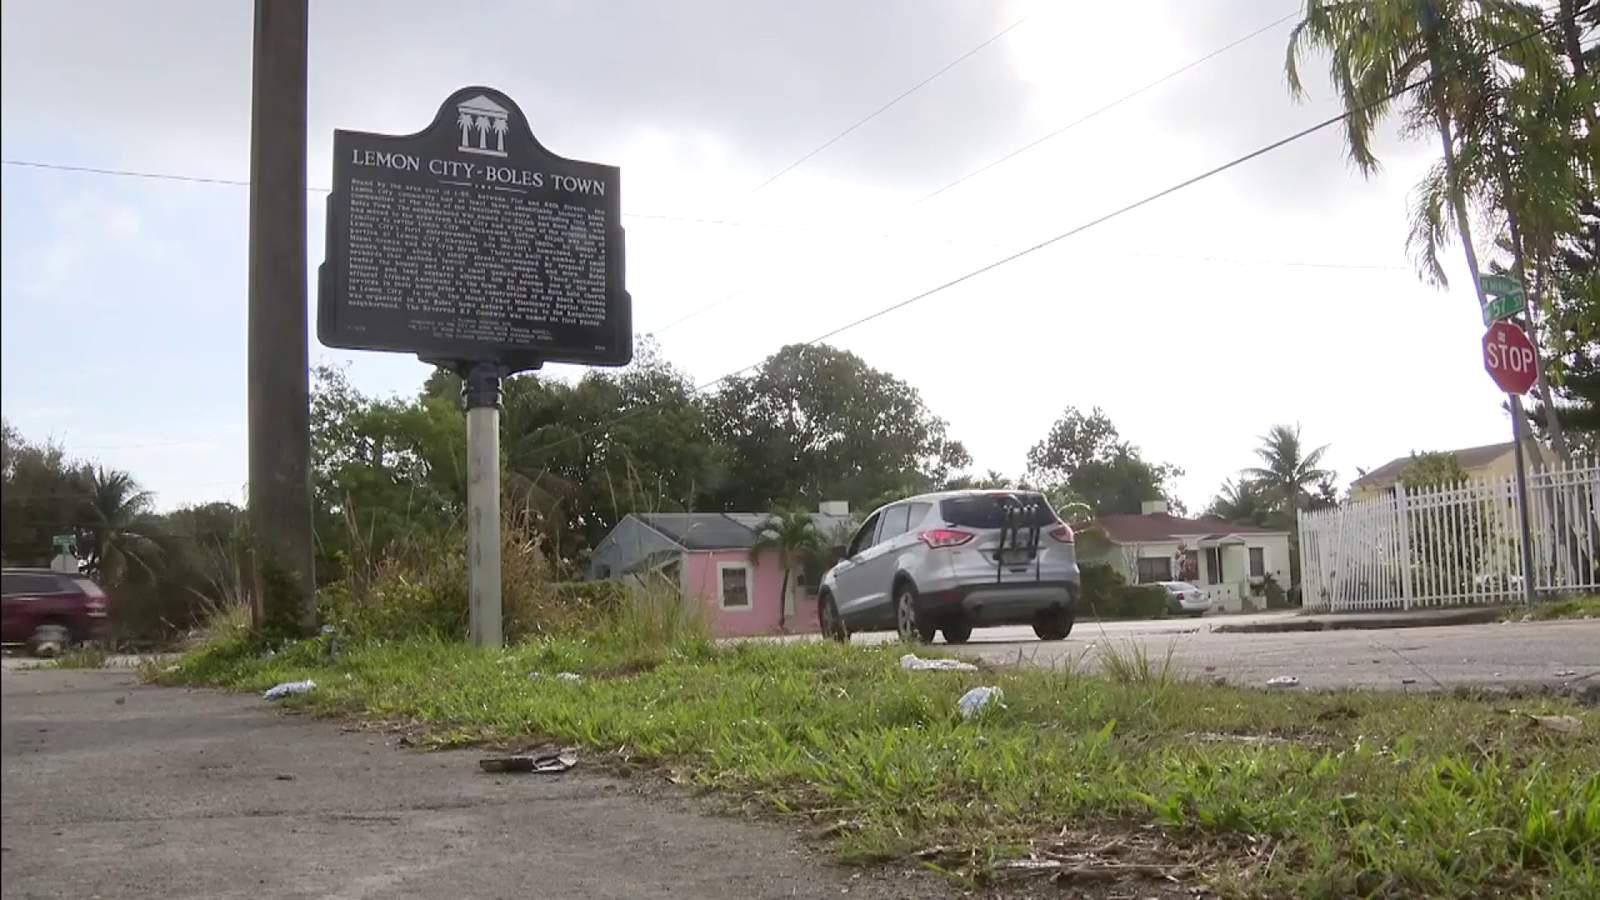 Miami historian/activist spearheads charge to erect markers commemorating 3 historically Black communities